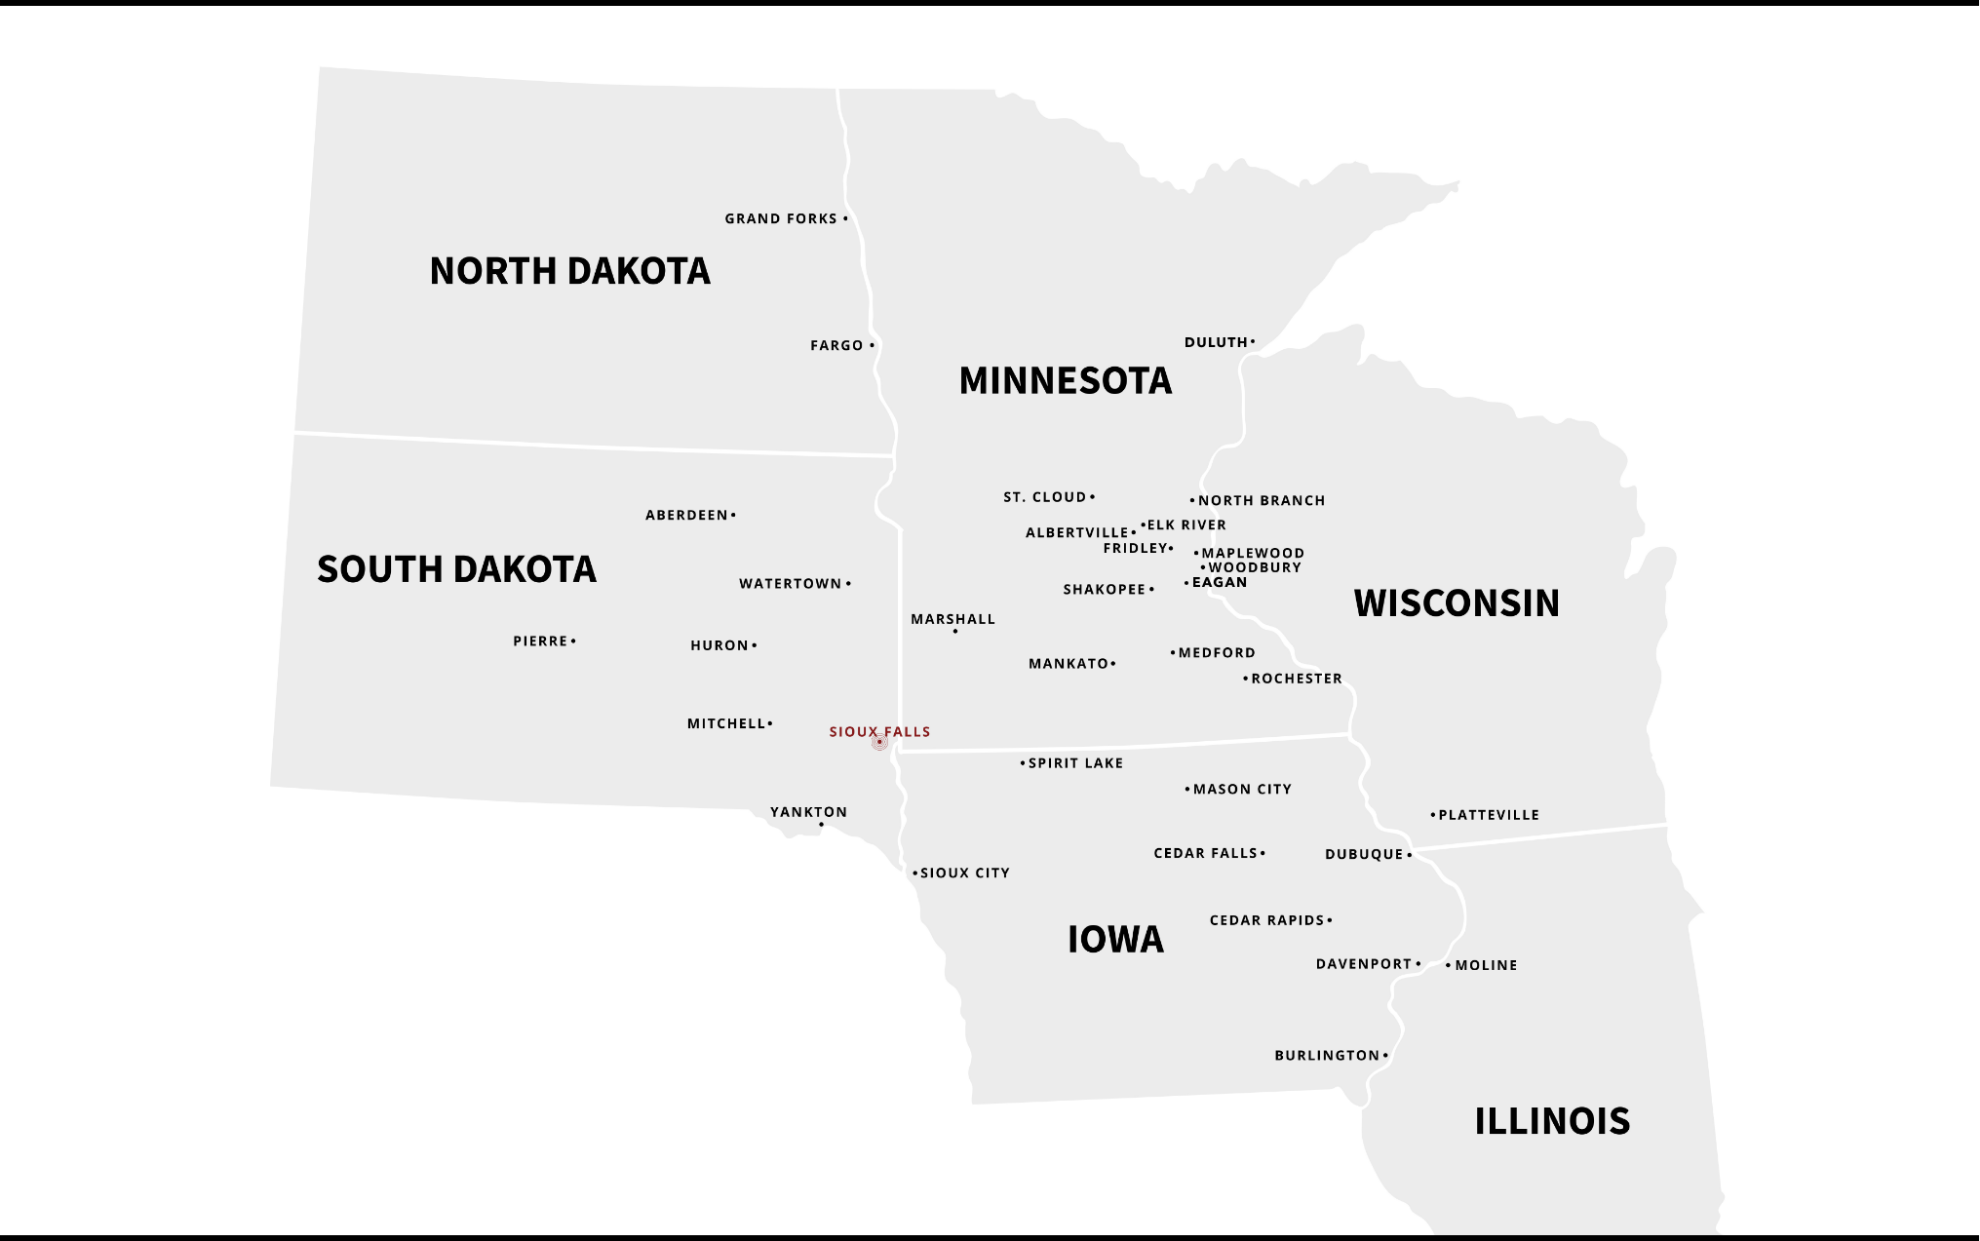 A map of our company's geographical footprint.